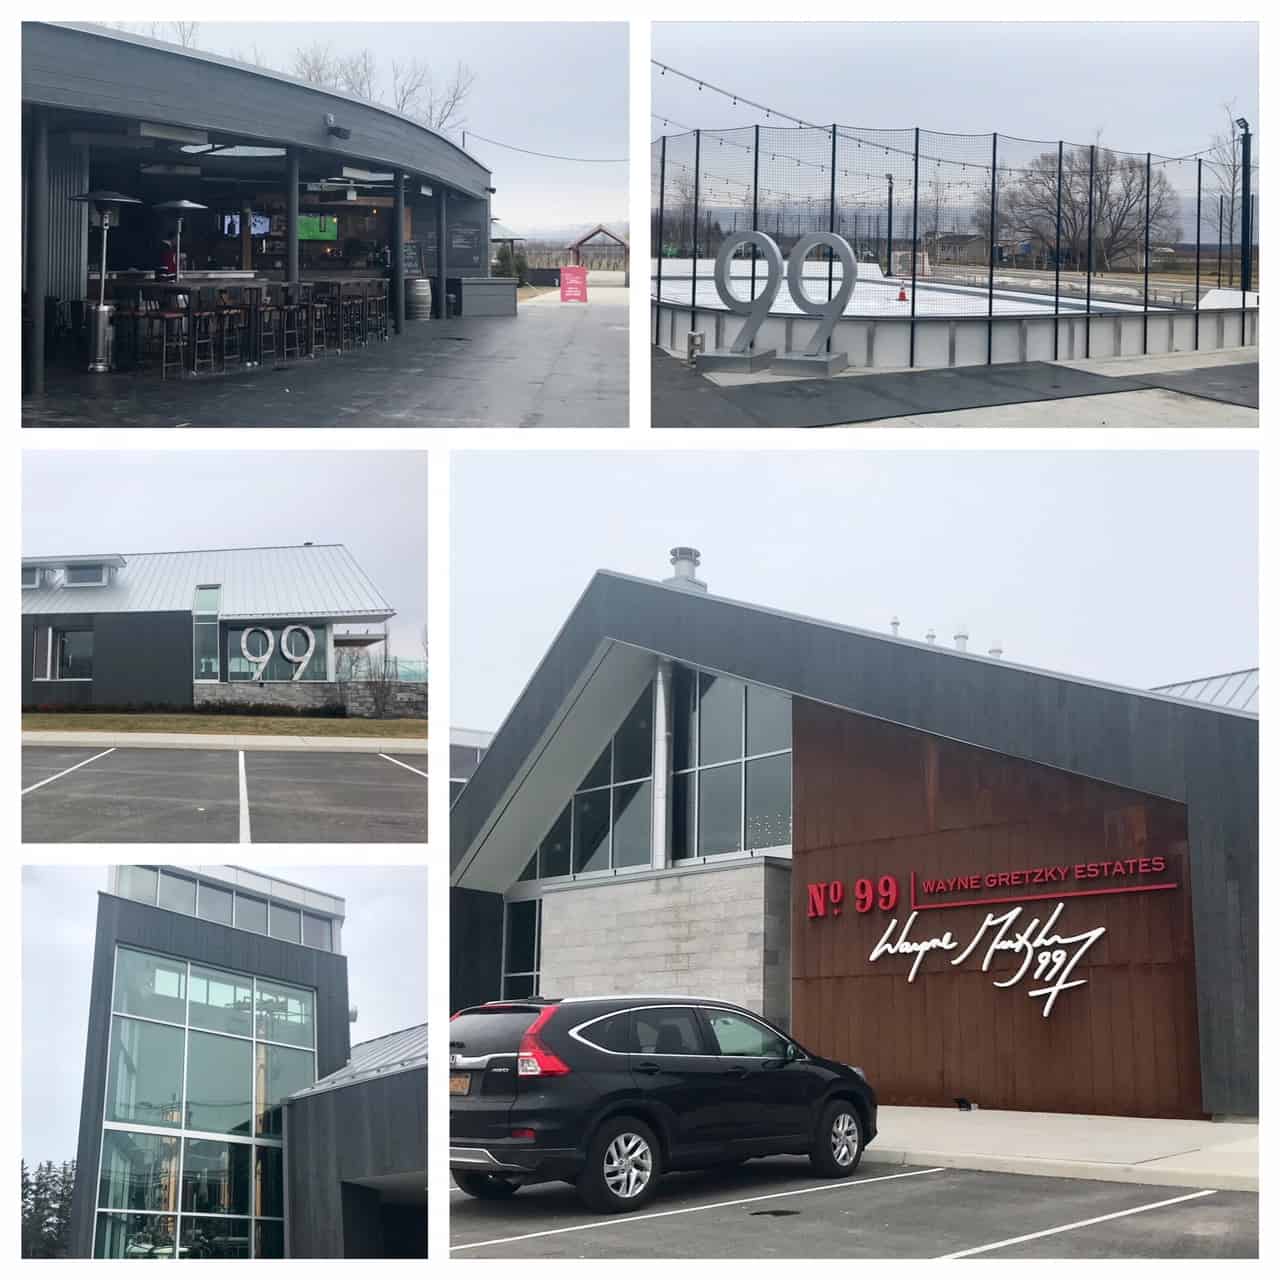 Collage of images from Wayne Gretzky Estates